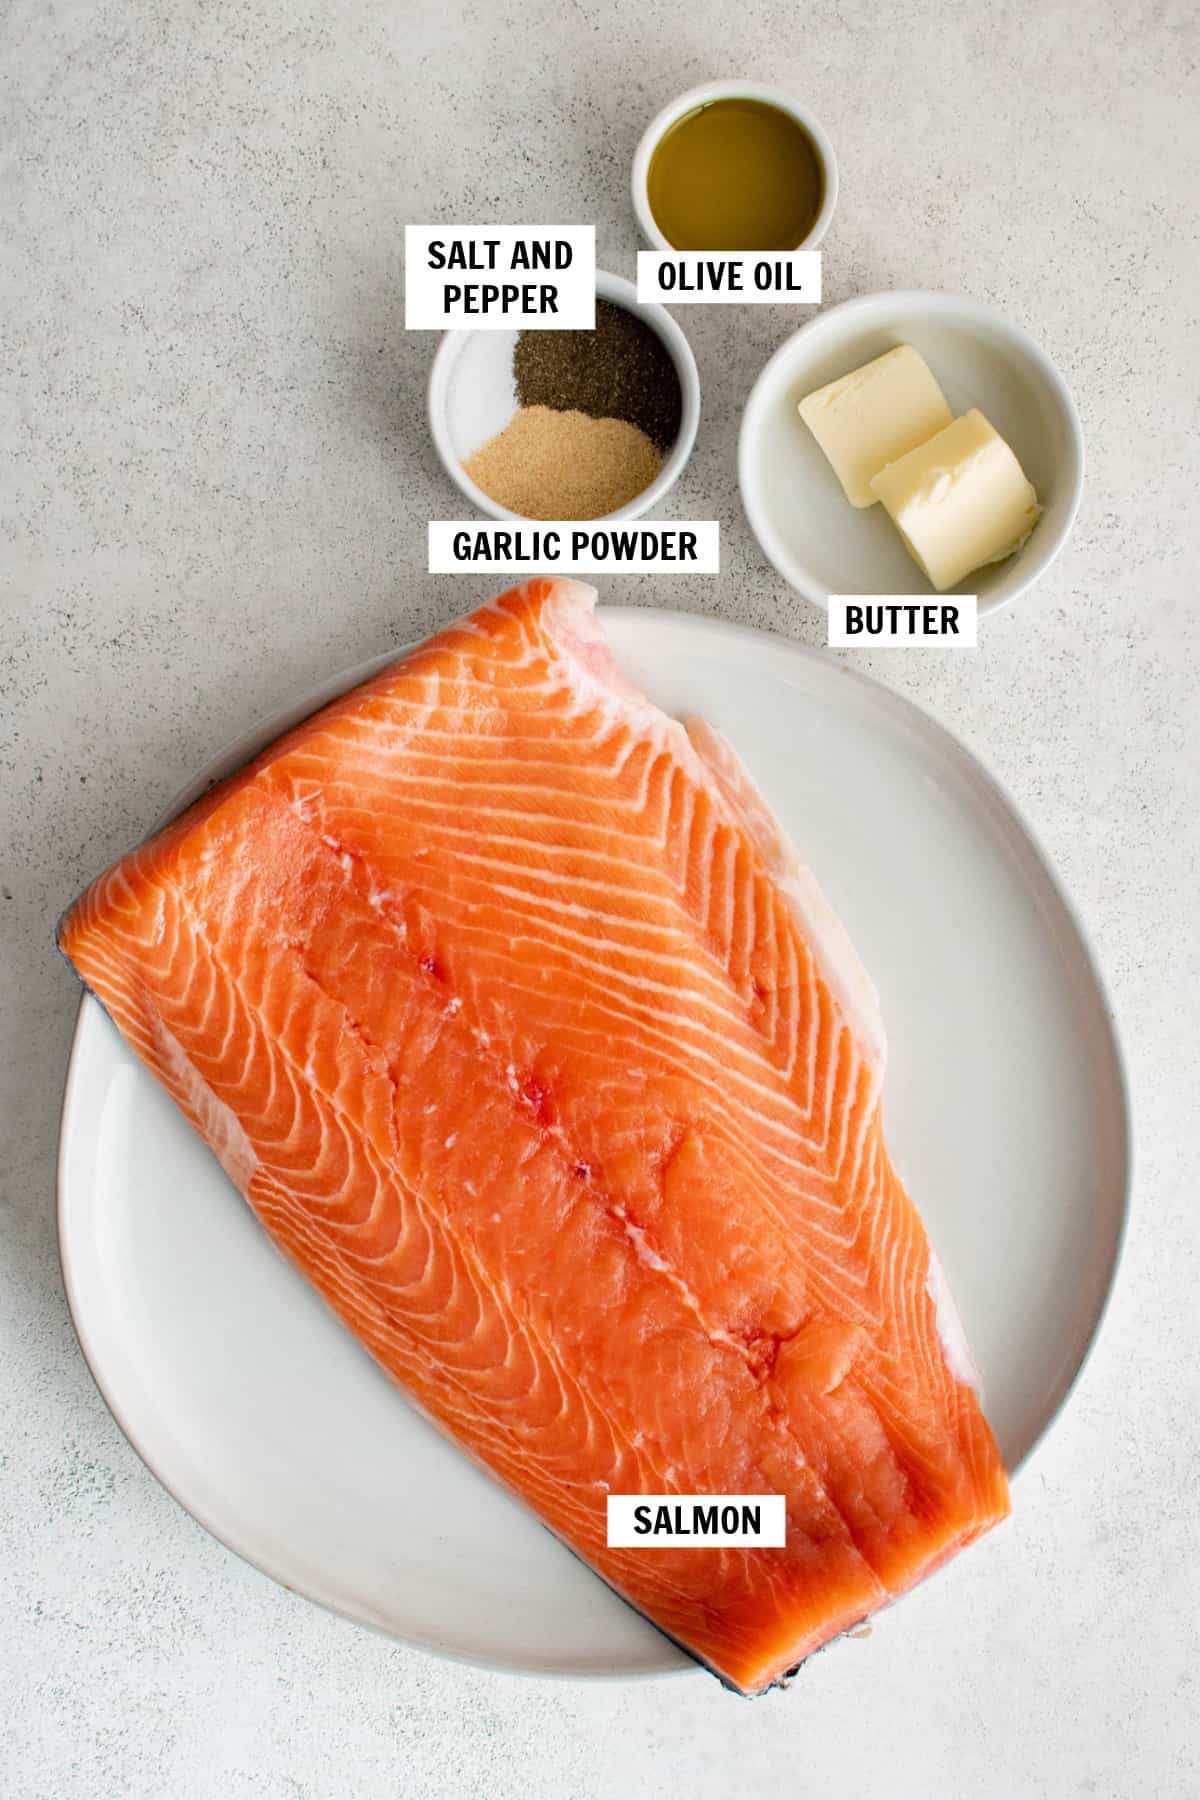 All of the ingredients for cast iron salmon on a white countertop including a salmon filet, butter, garlic powder, salt, pepper and olive oil.